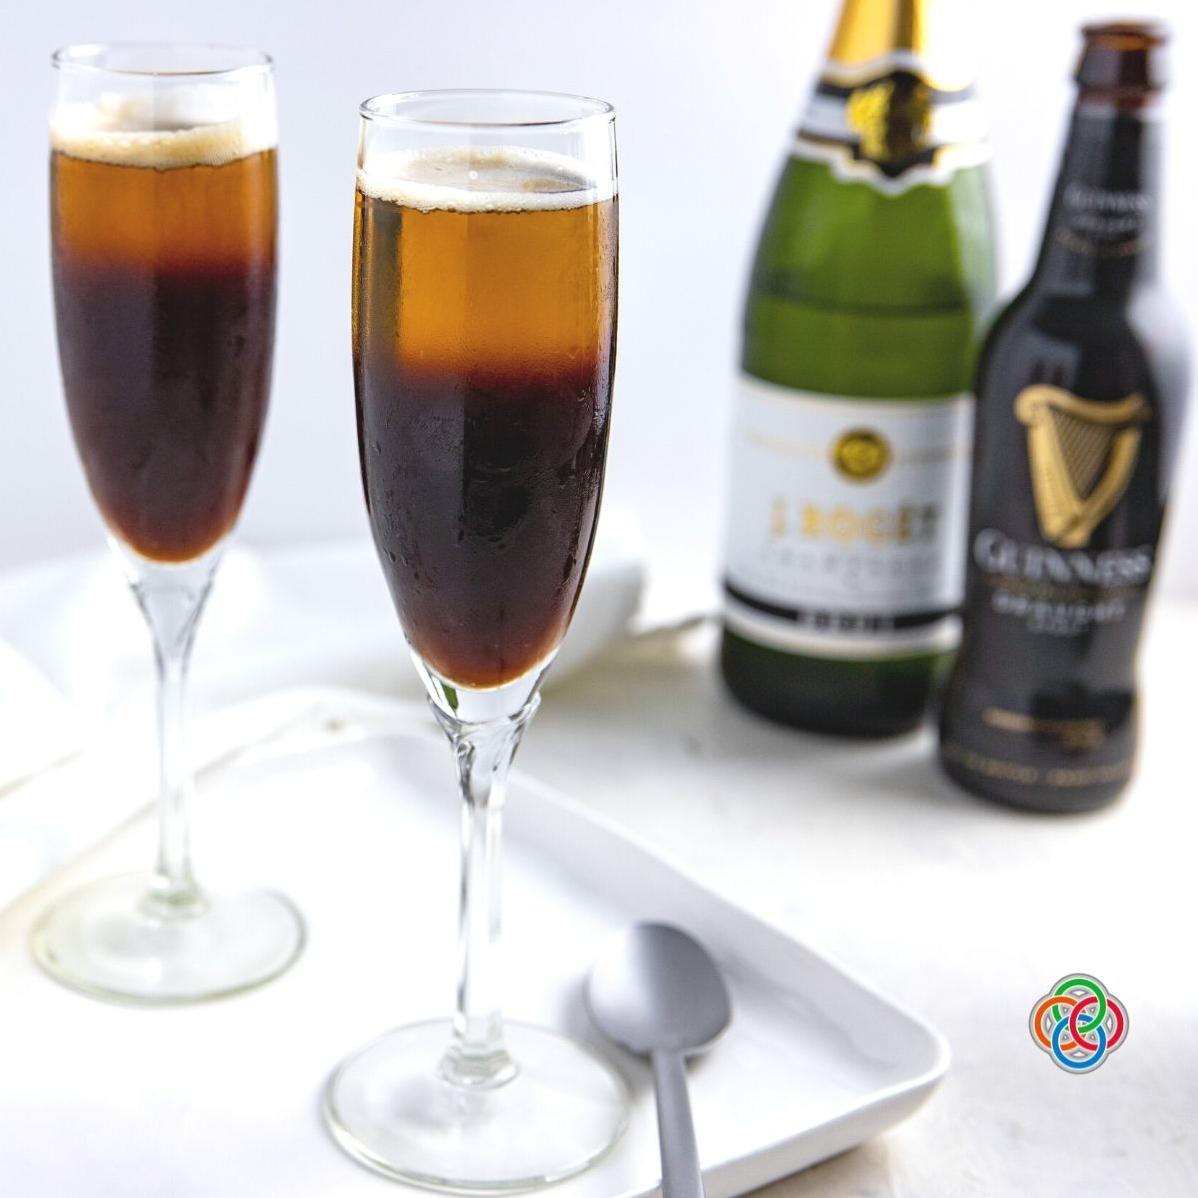  Raising a glass of the bubbly black goodness!